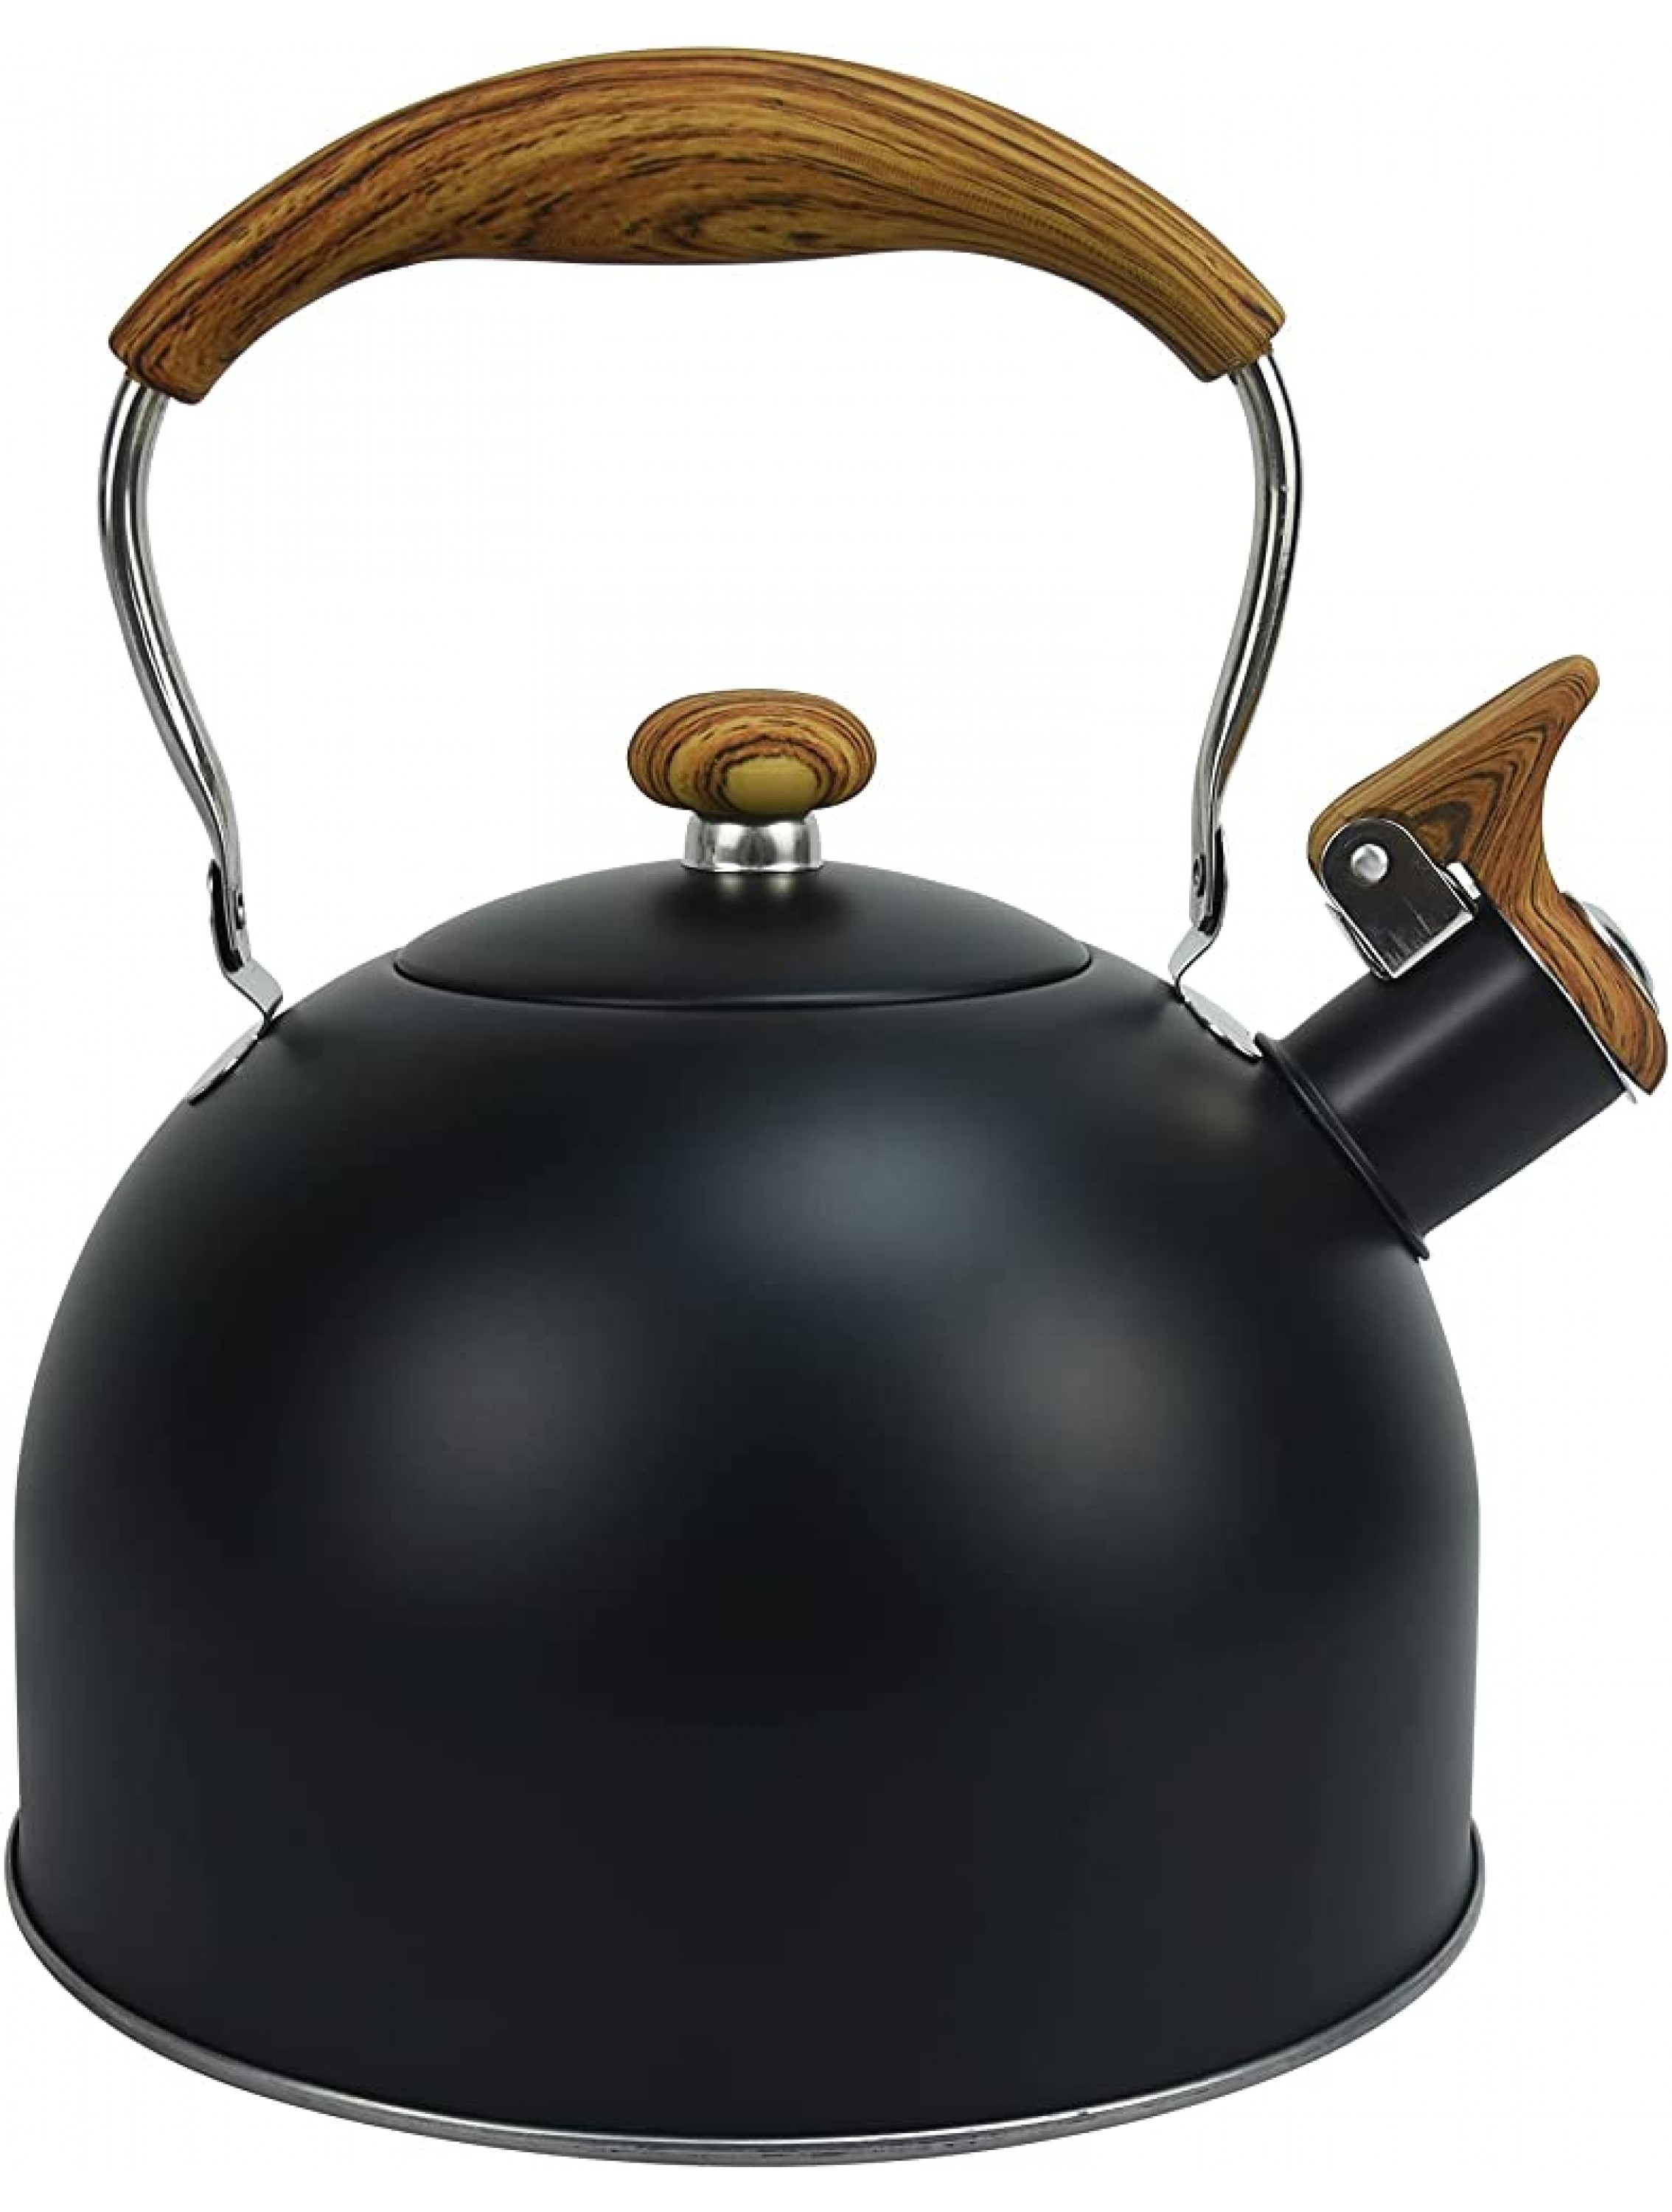 Tottshak Tea kettle 2.5 Quart automatic Whistling Teapot Stainless Steel Tea Pot with Pattern Handle Anti-Hot Handle and Anti-slip Suitable for All Heat SourcesBlack - BR84CCCD5